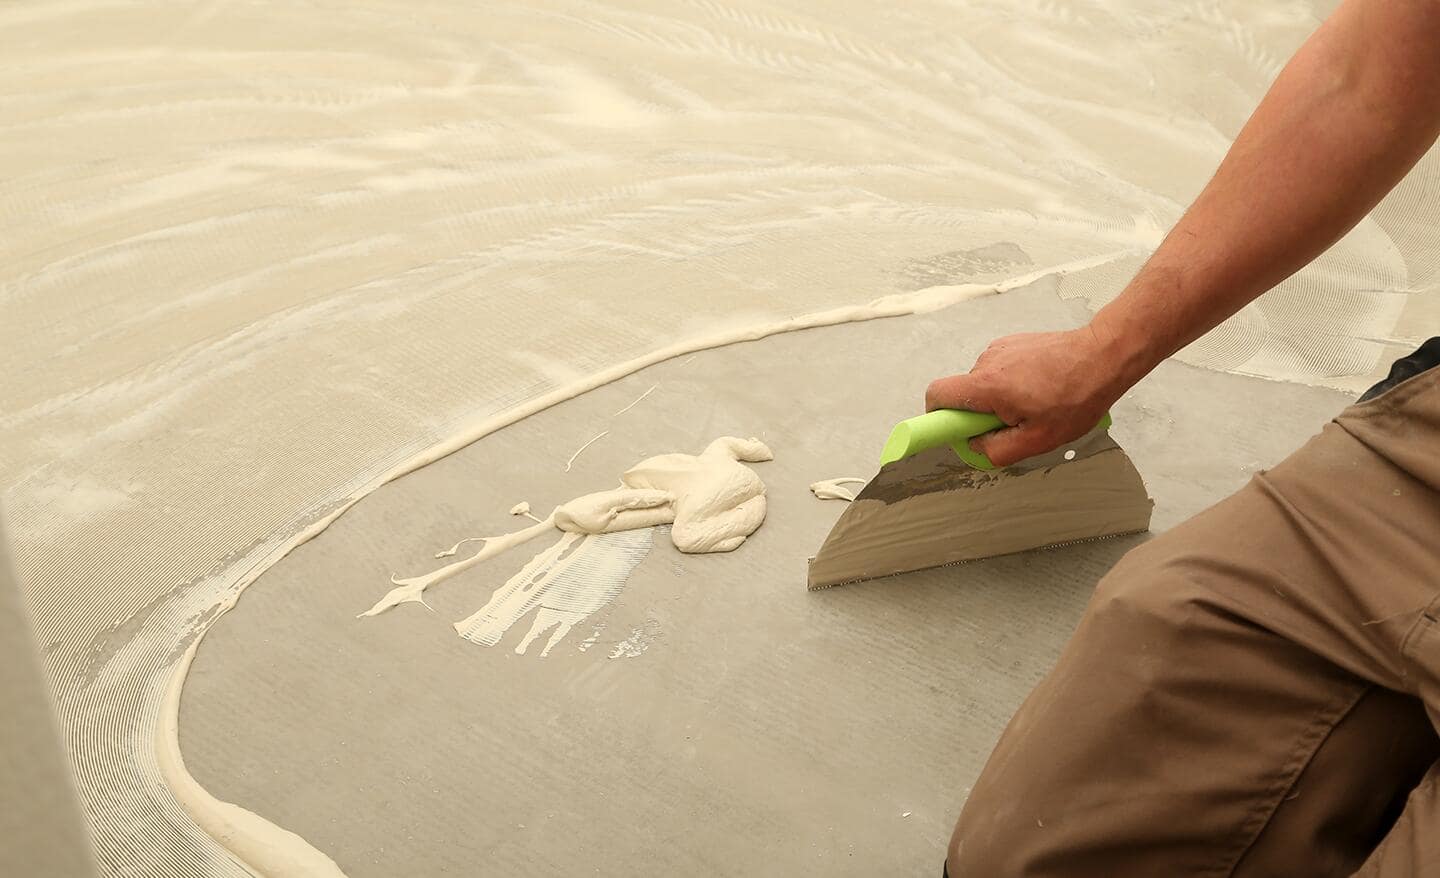 A person uses a trowel to spread vinyl adhesive on concrete floor.